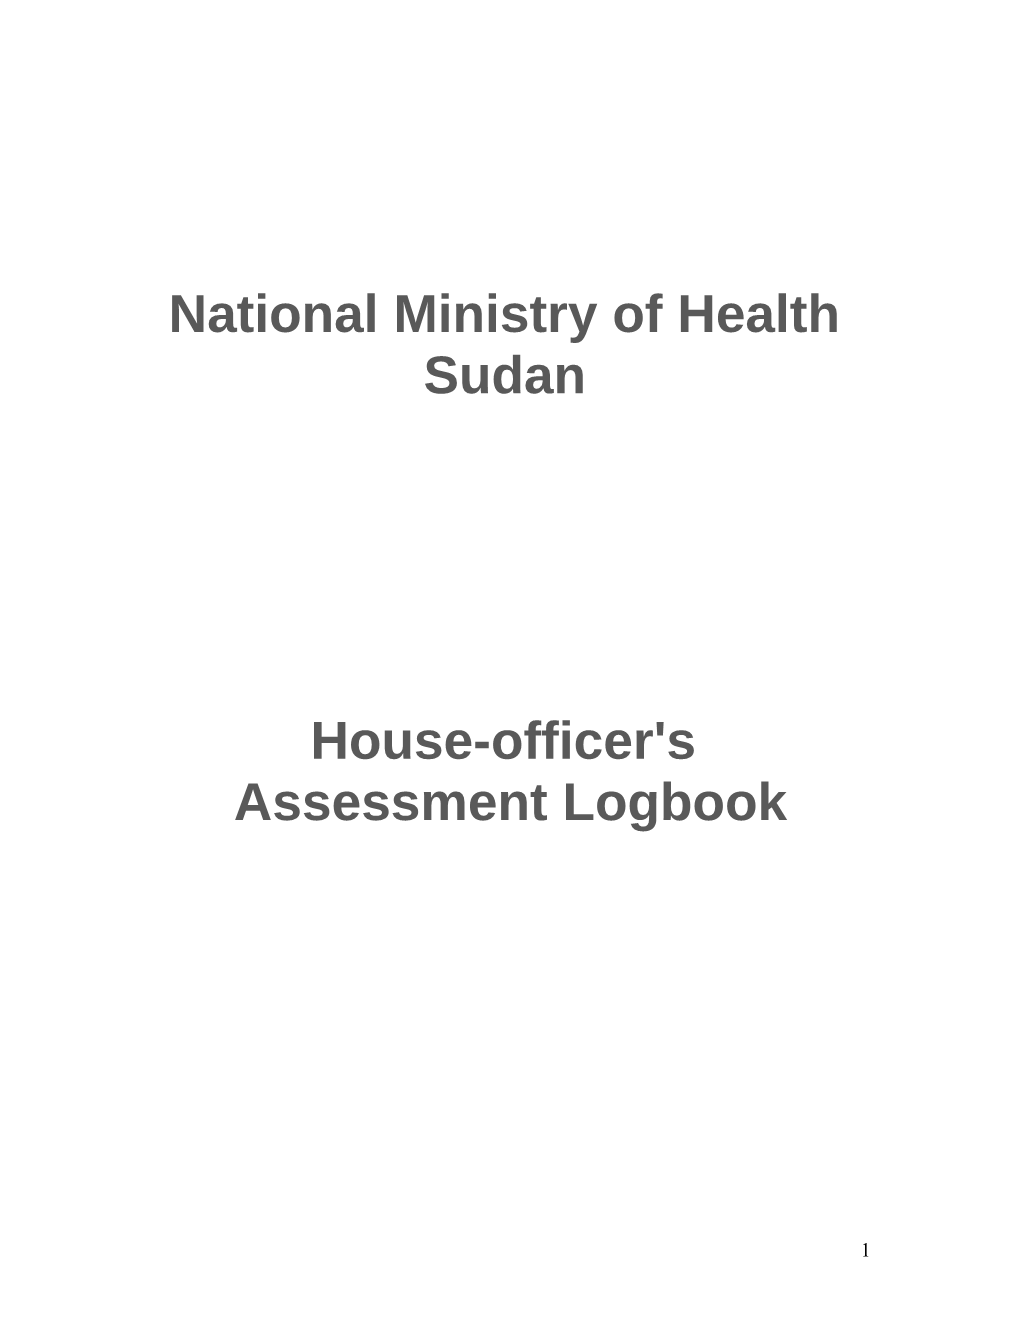 National Ministry of Health Sudan